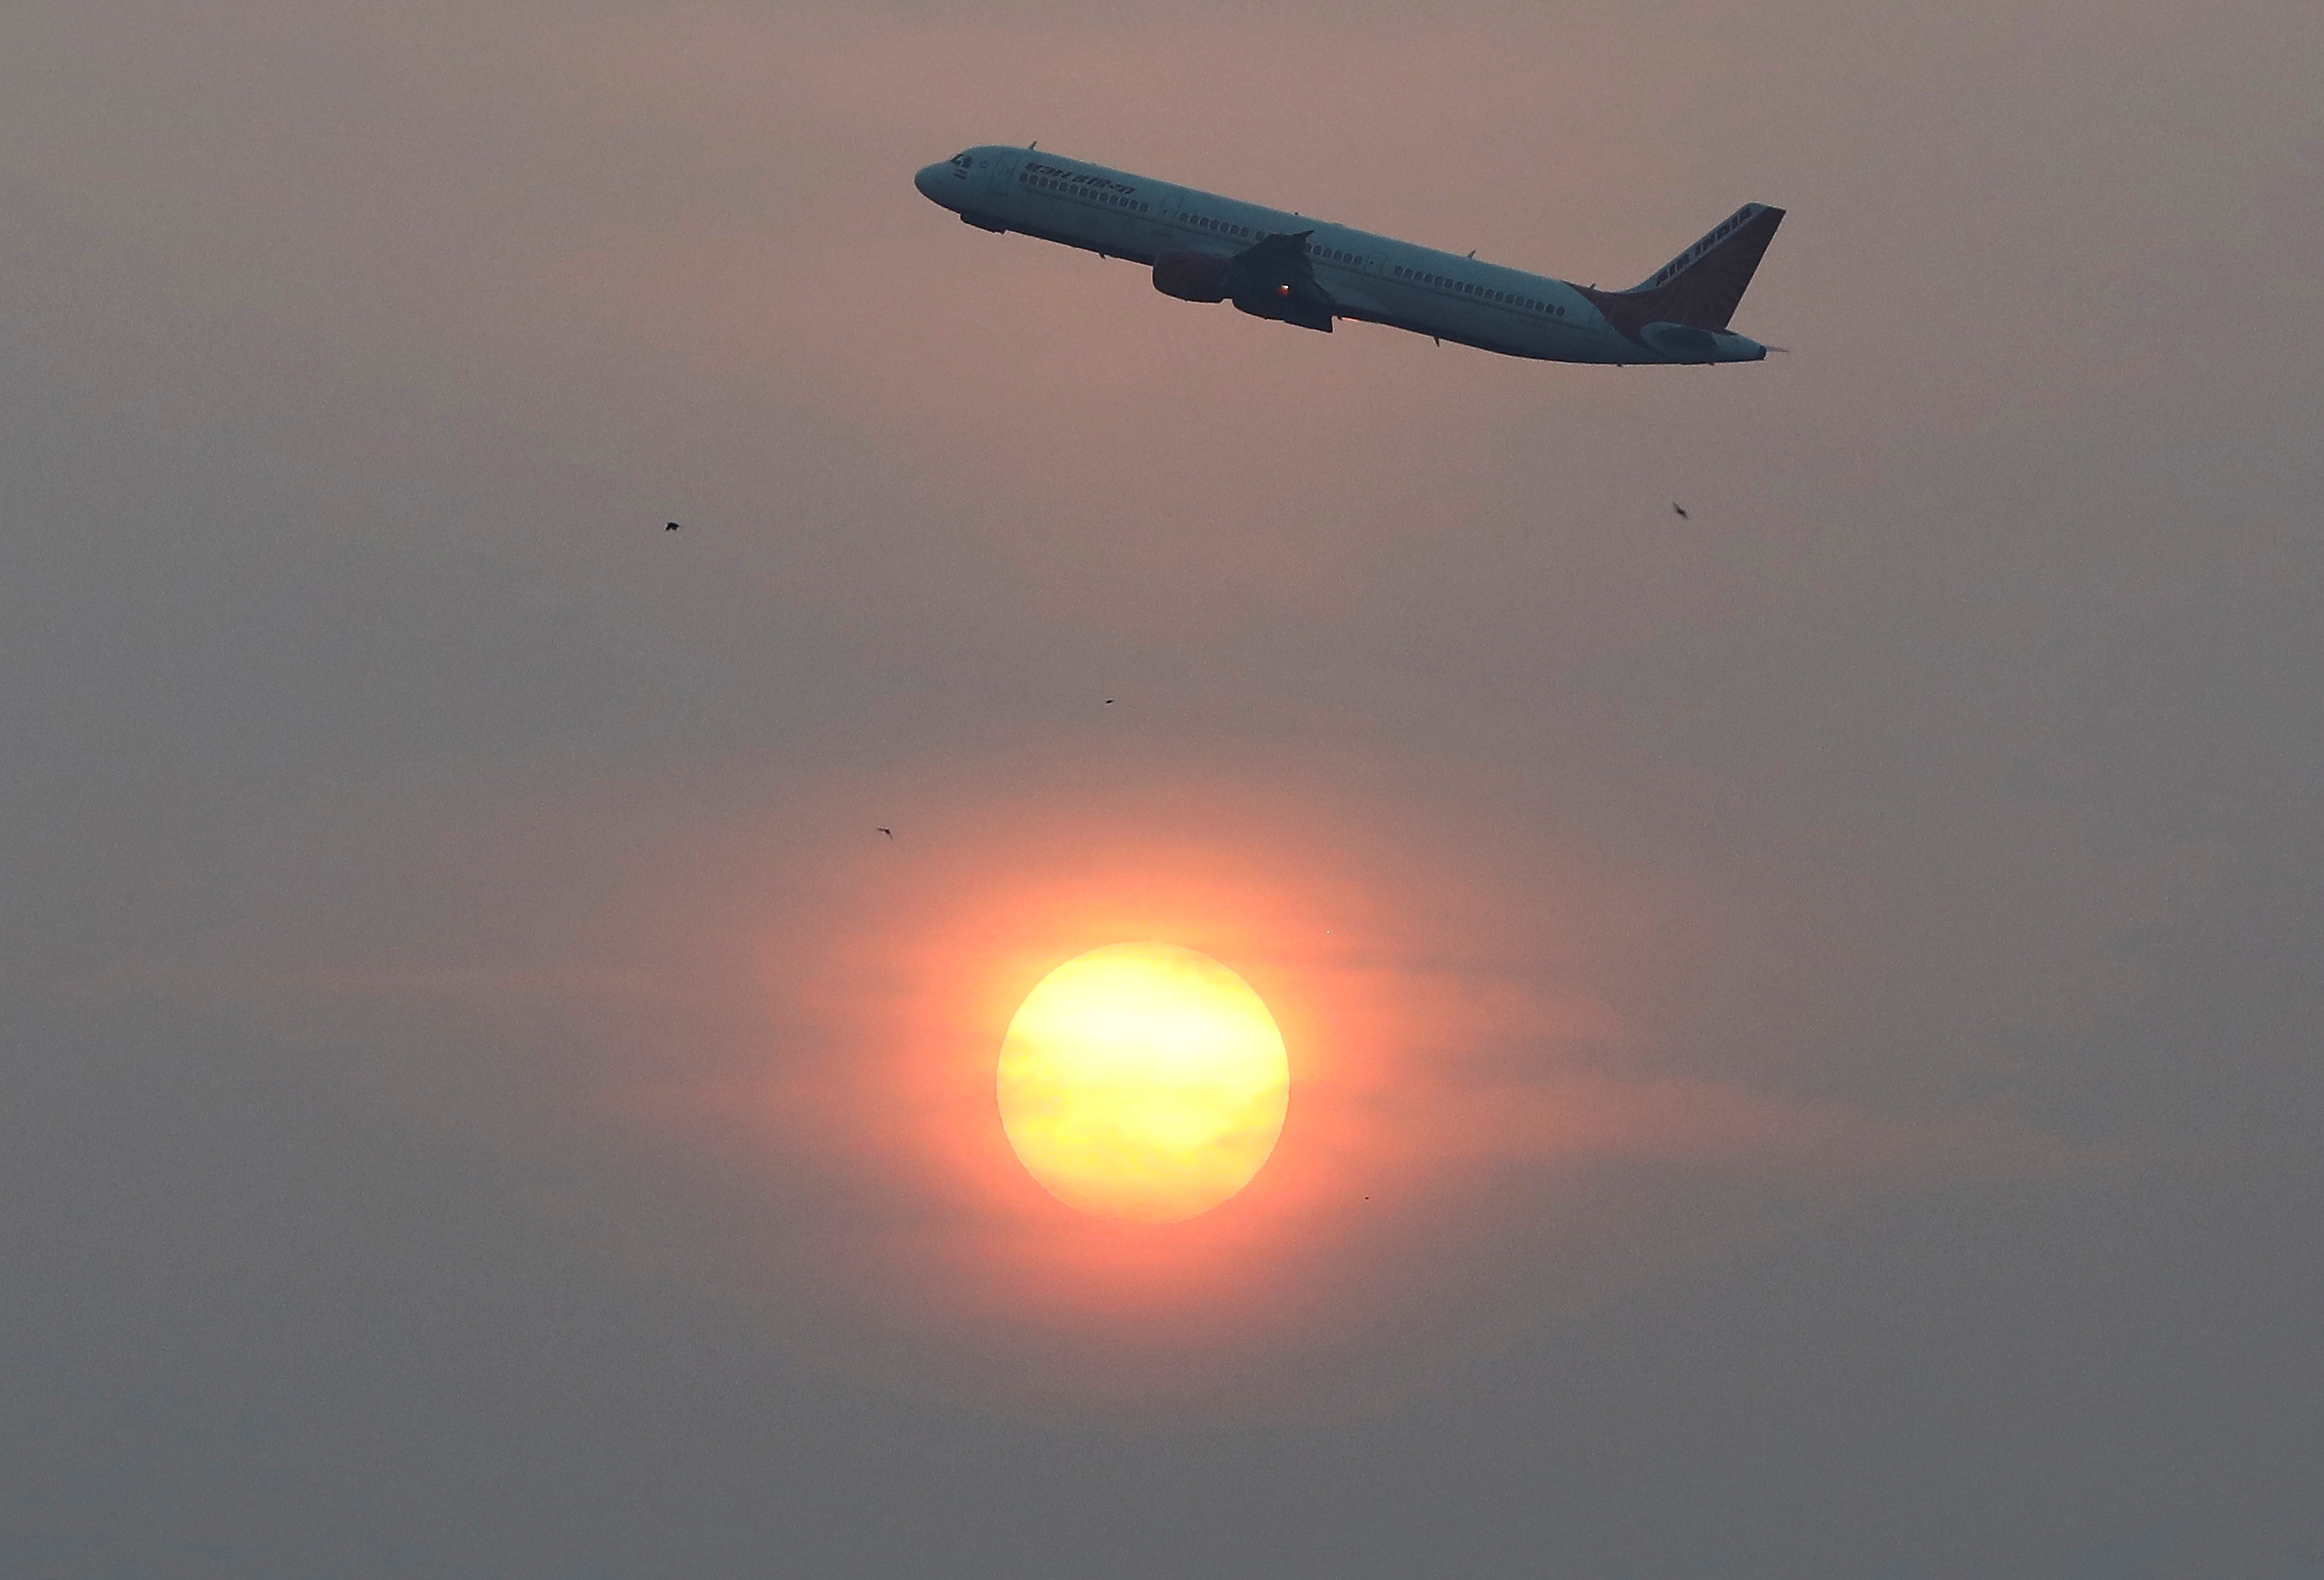 An Air India passenger plane passes the sun on a smoggy morning in Ahmedabad